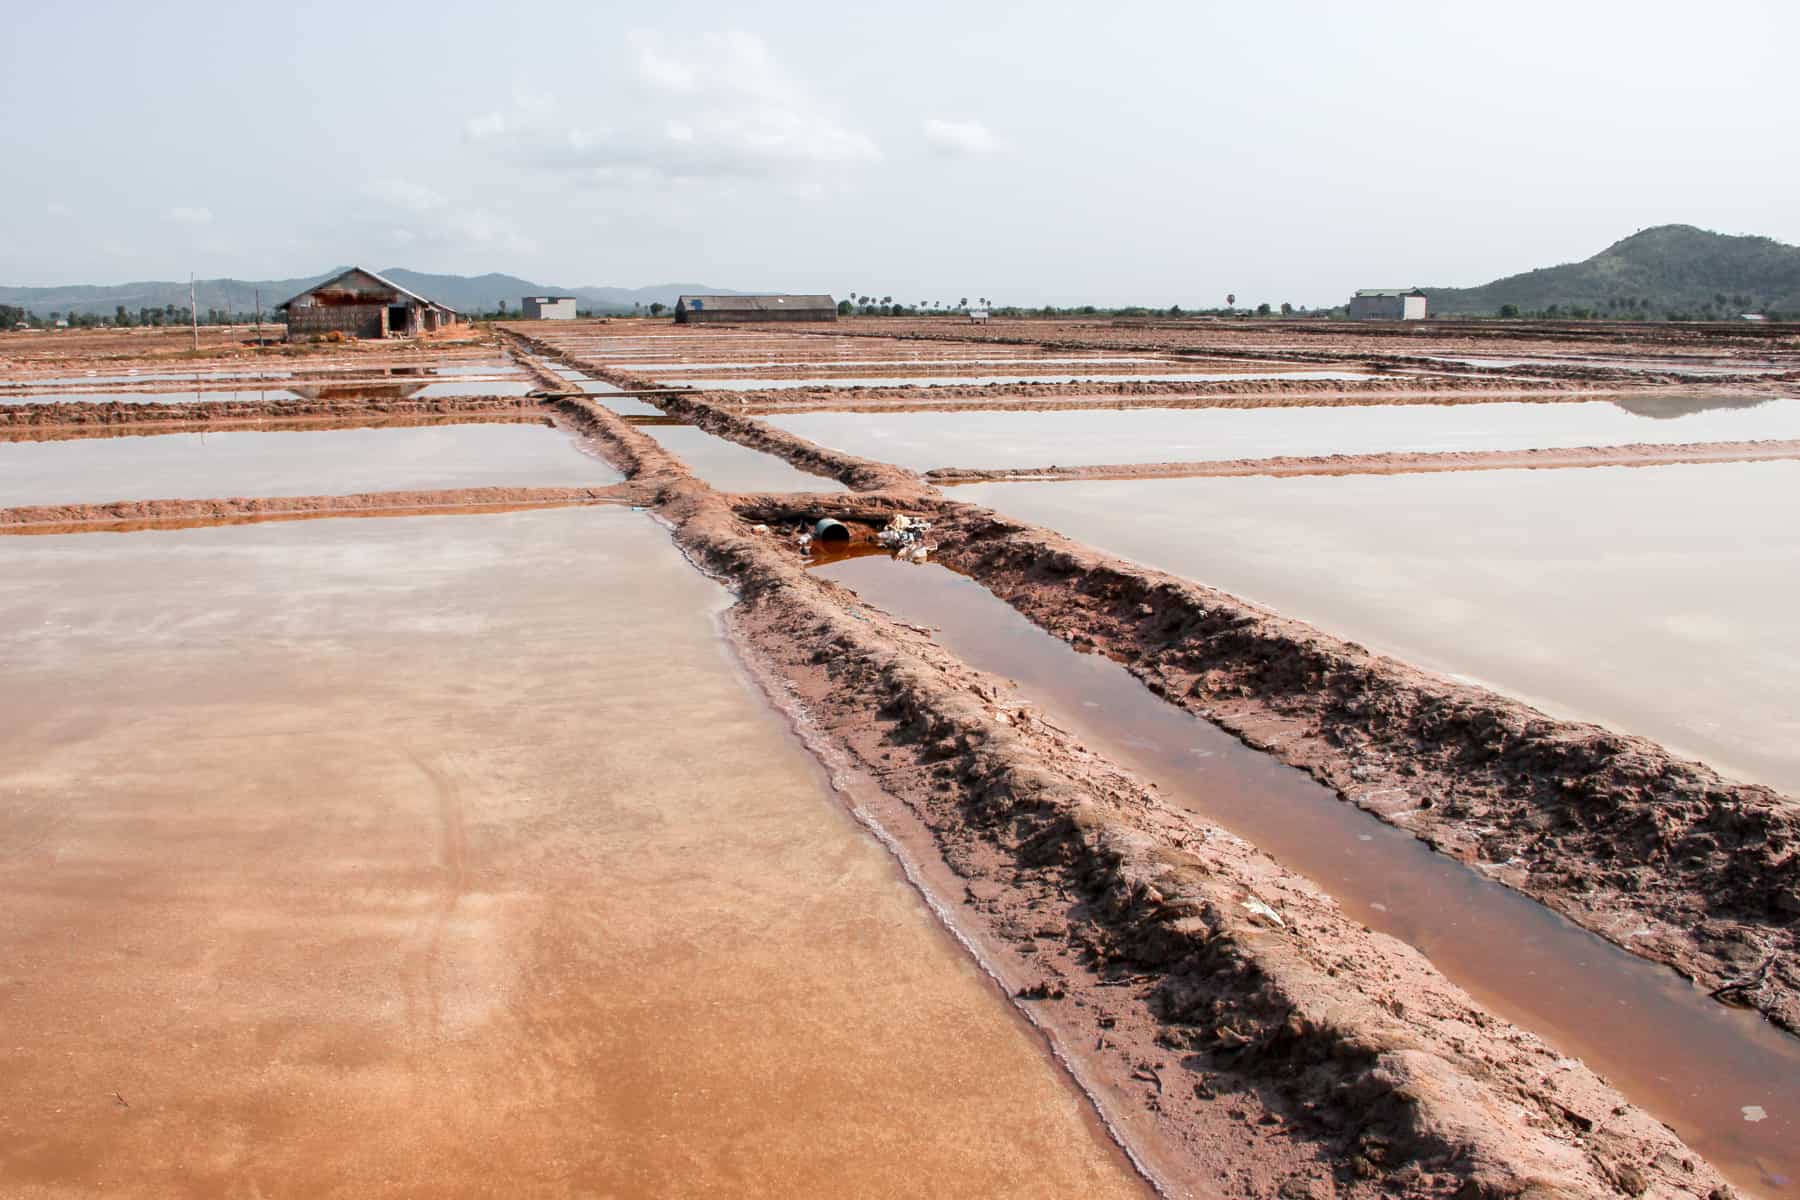 Rows of rectangular pools of water with golden brown mud walls and a distant triangular wooden roofed hut, showing the typical Salt Fields of Kampot, Cambodia.